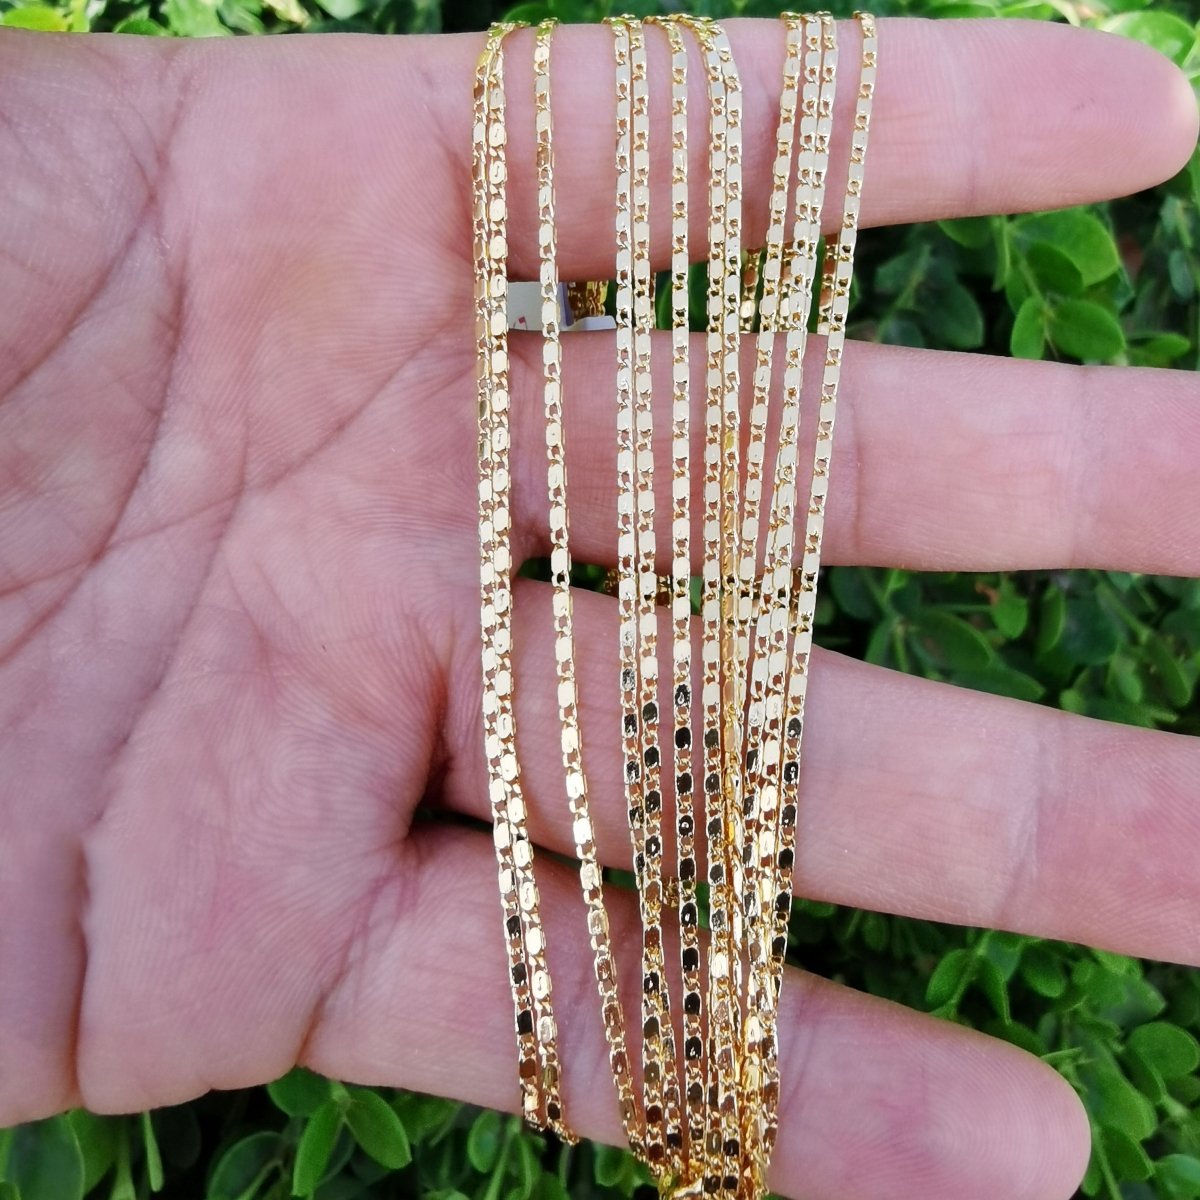 17.6 inch Scroll Chain Necklace, 24K Gold Plated Finished Chain For Jewelry Necklace Making, Dainty 1.4mm Unique Necklace w/ Spring Ring | CN-873 Clearance Pricing - DLUXCA